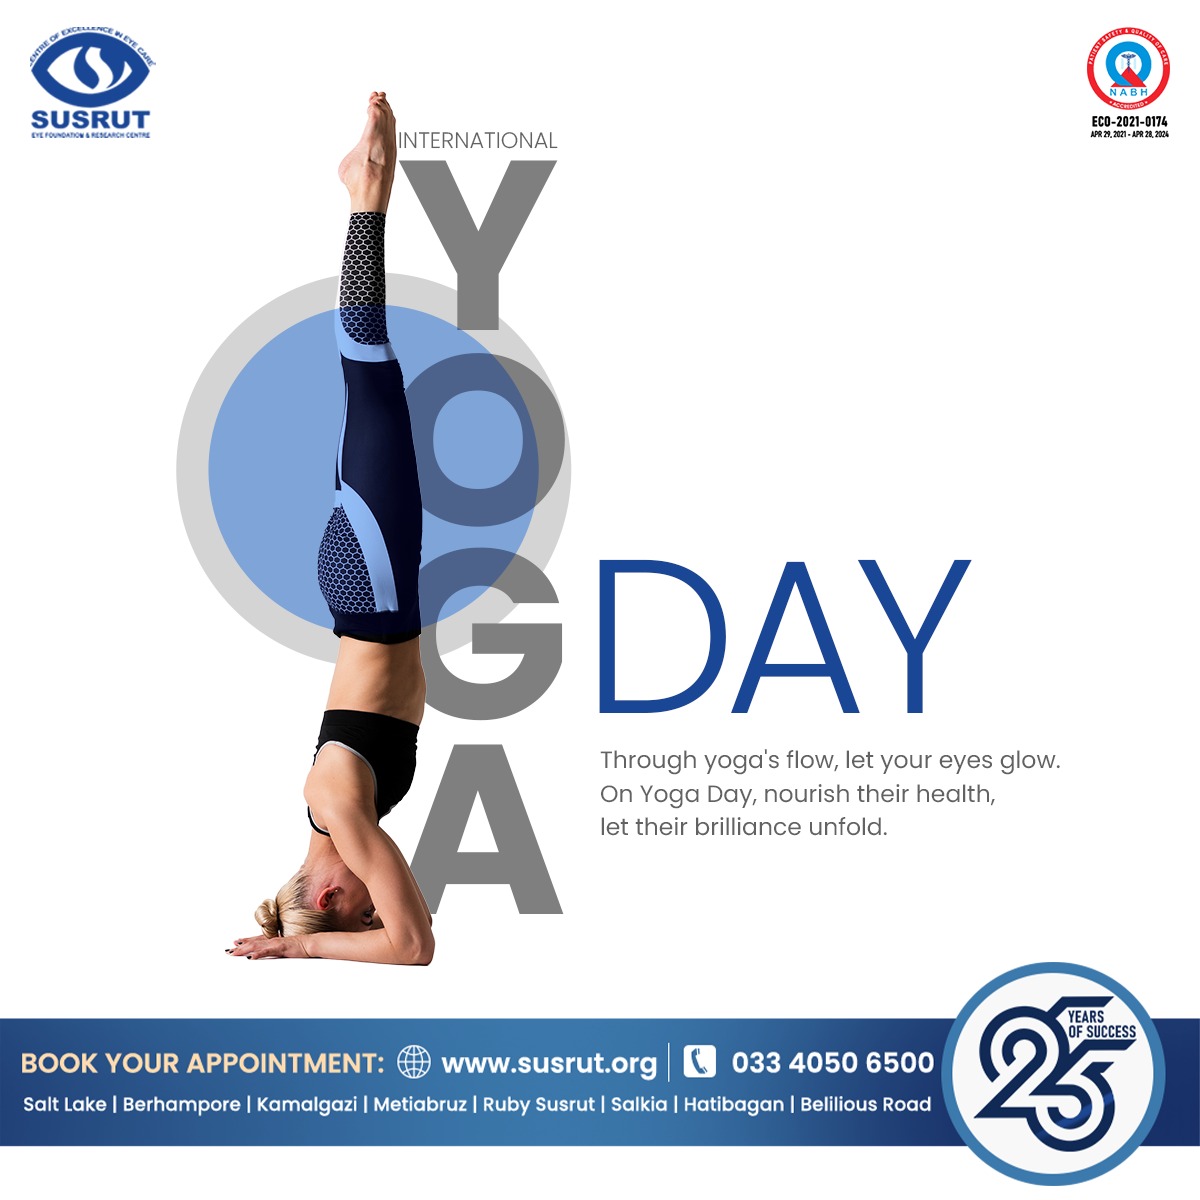 When you listen to yourself, everything comes naturally.   That is yoga. 
𝐈𝐍𝐓𝐄𝐑𝐍𝐀𝐓𝐈𝐎𝐍𝐀𝐋 𝐘𝐎𝐆𝐀 𝐃𝐀𝐘 ❤❤❤❤ susrut.org
#GreenVisionCentre #SusrutEyeFoundation #EyeCareYouDeserve #EyeExperts #RuralBengal #HealthyEyes